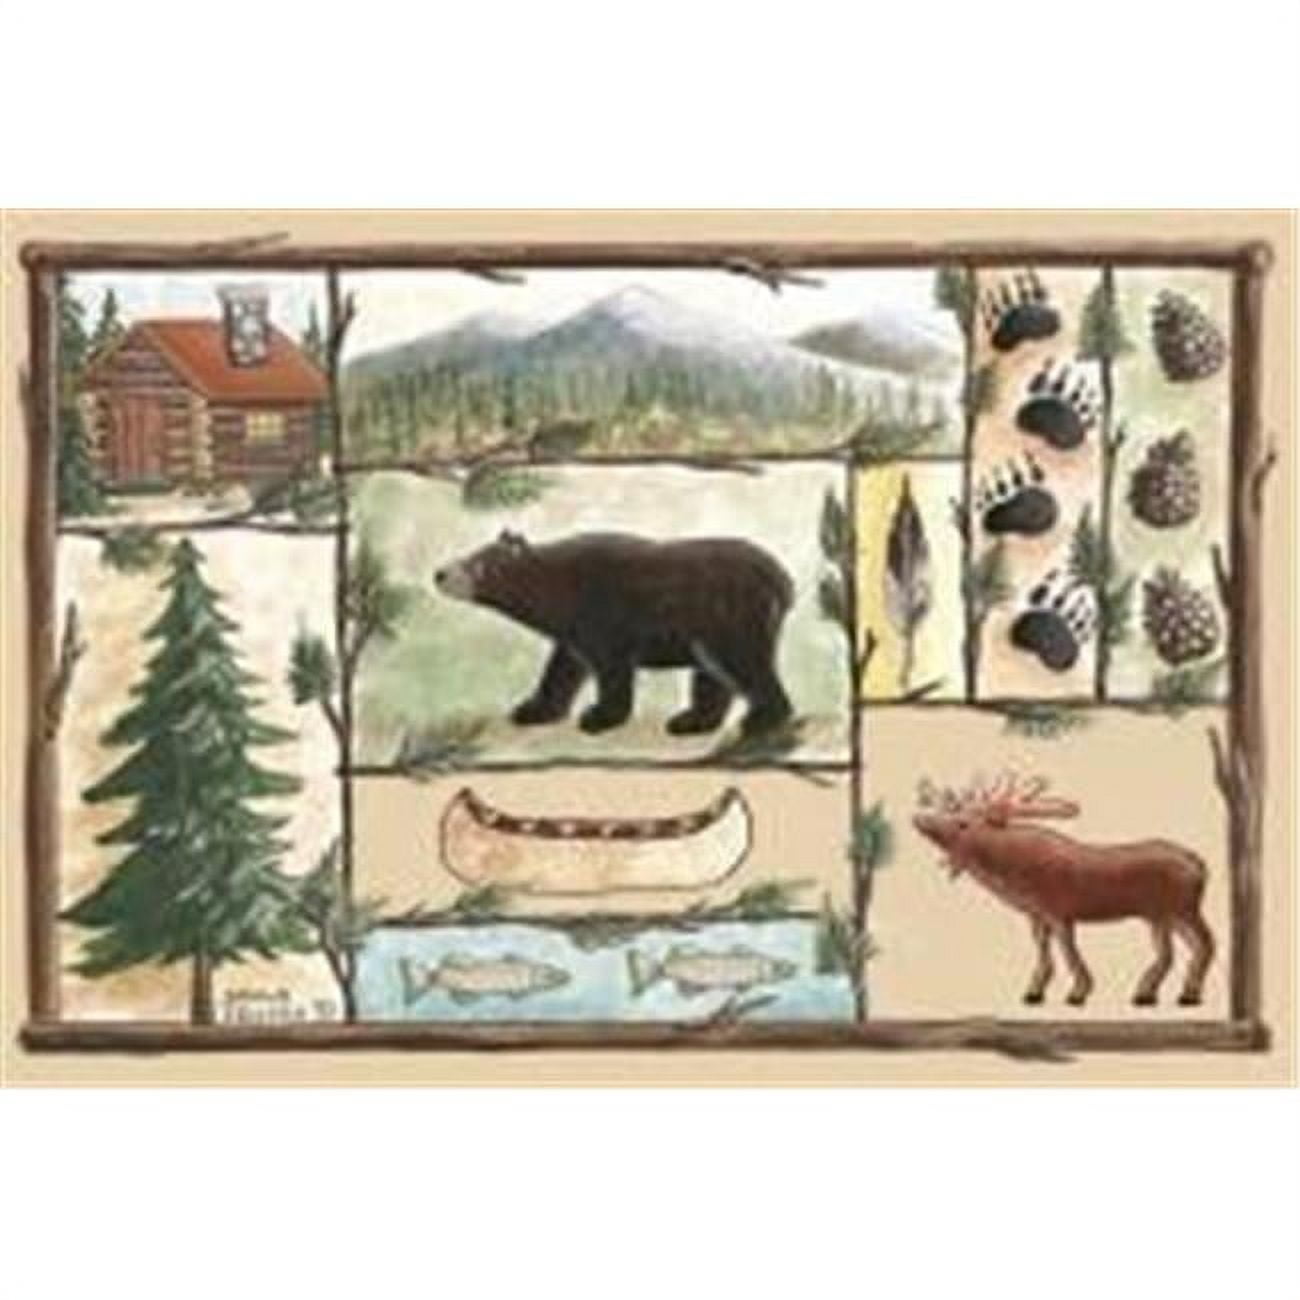 Yellowstone Grizzly Bear Wolf Cabin Fabric Panel Sewing Craft Decor Pillow